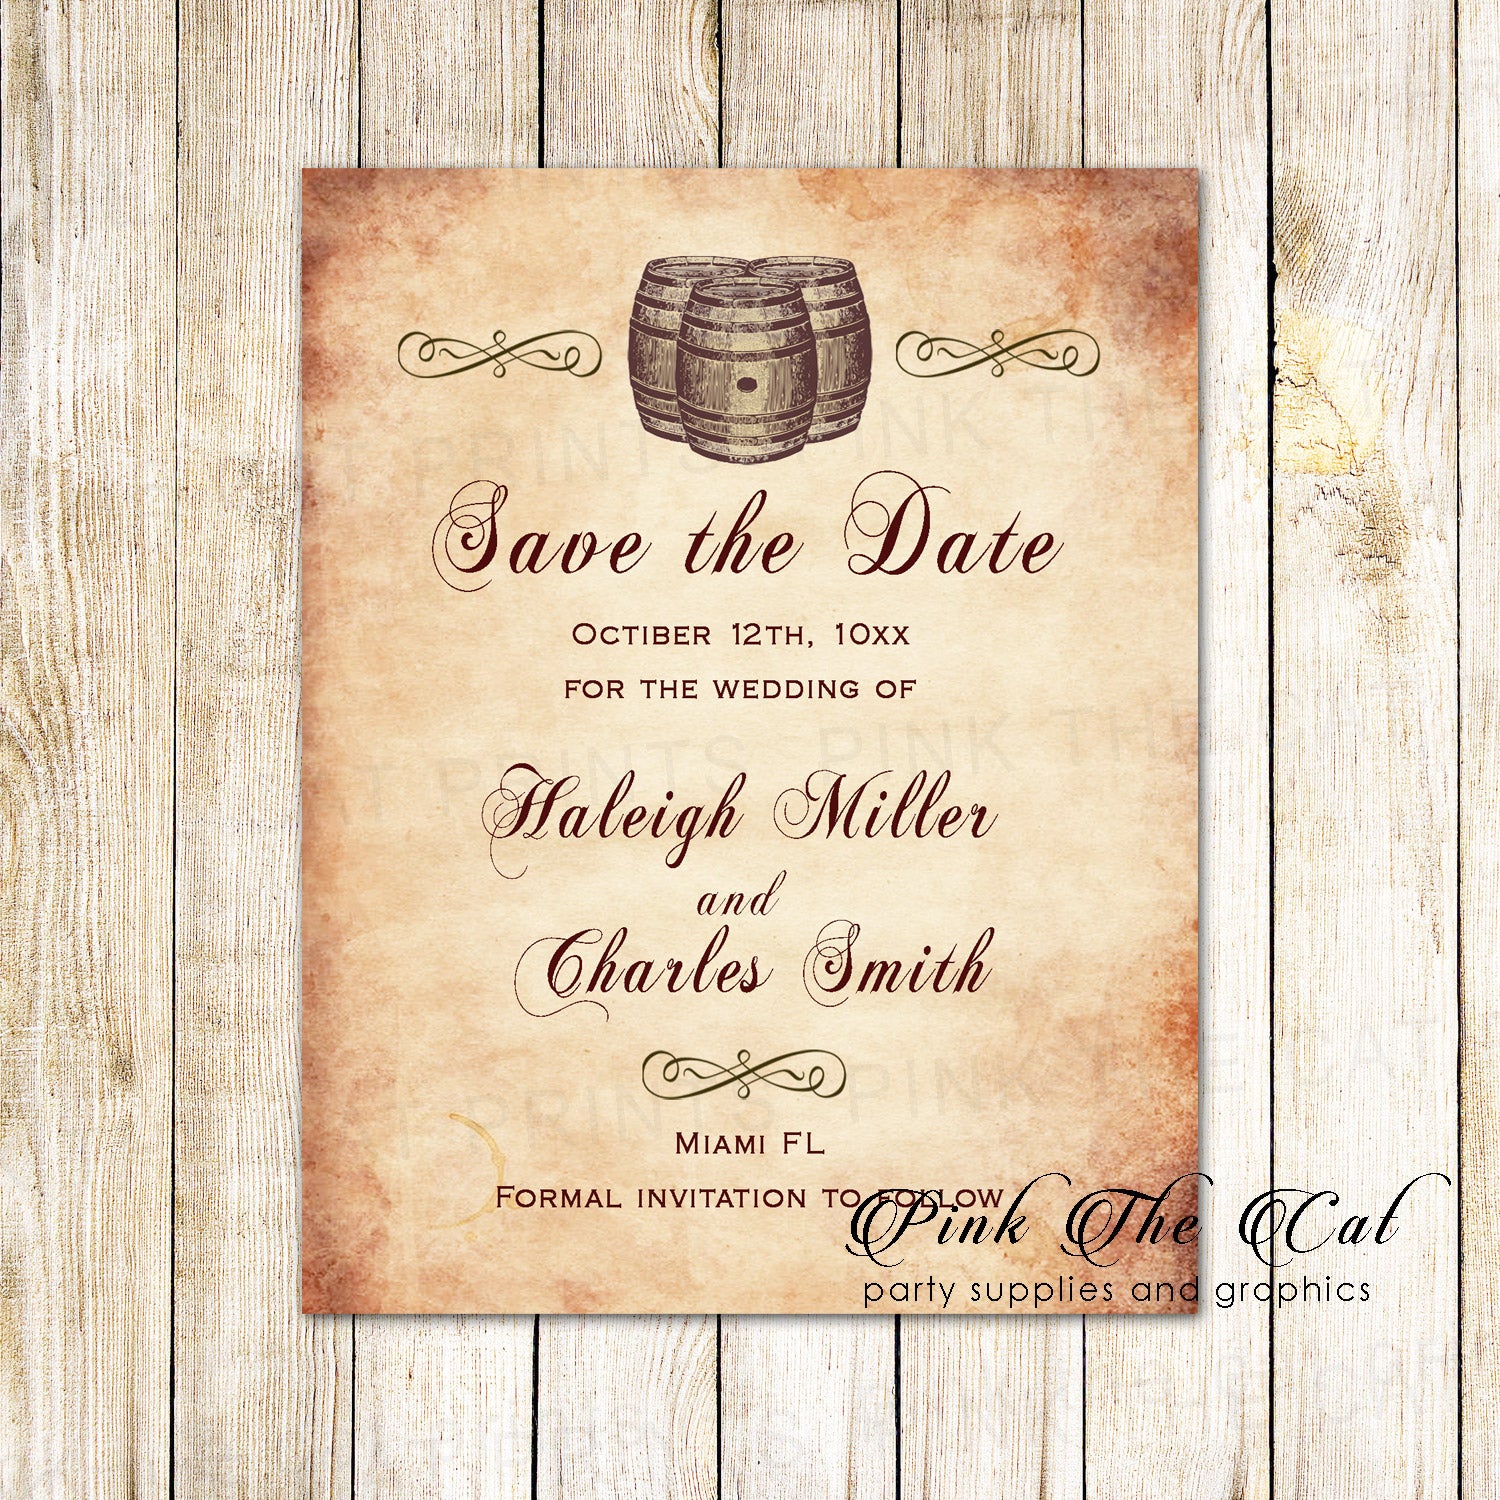 Rustic wine barrel save the date cards wedding printable